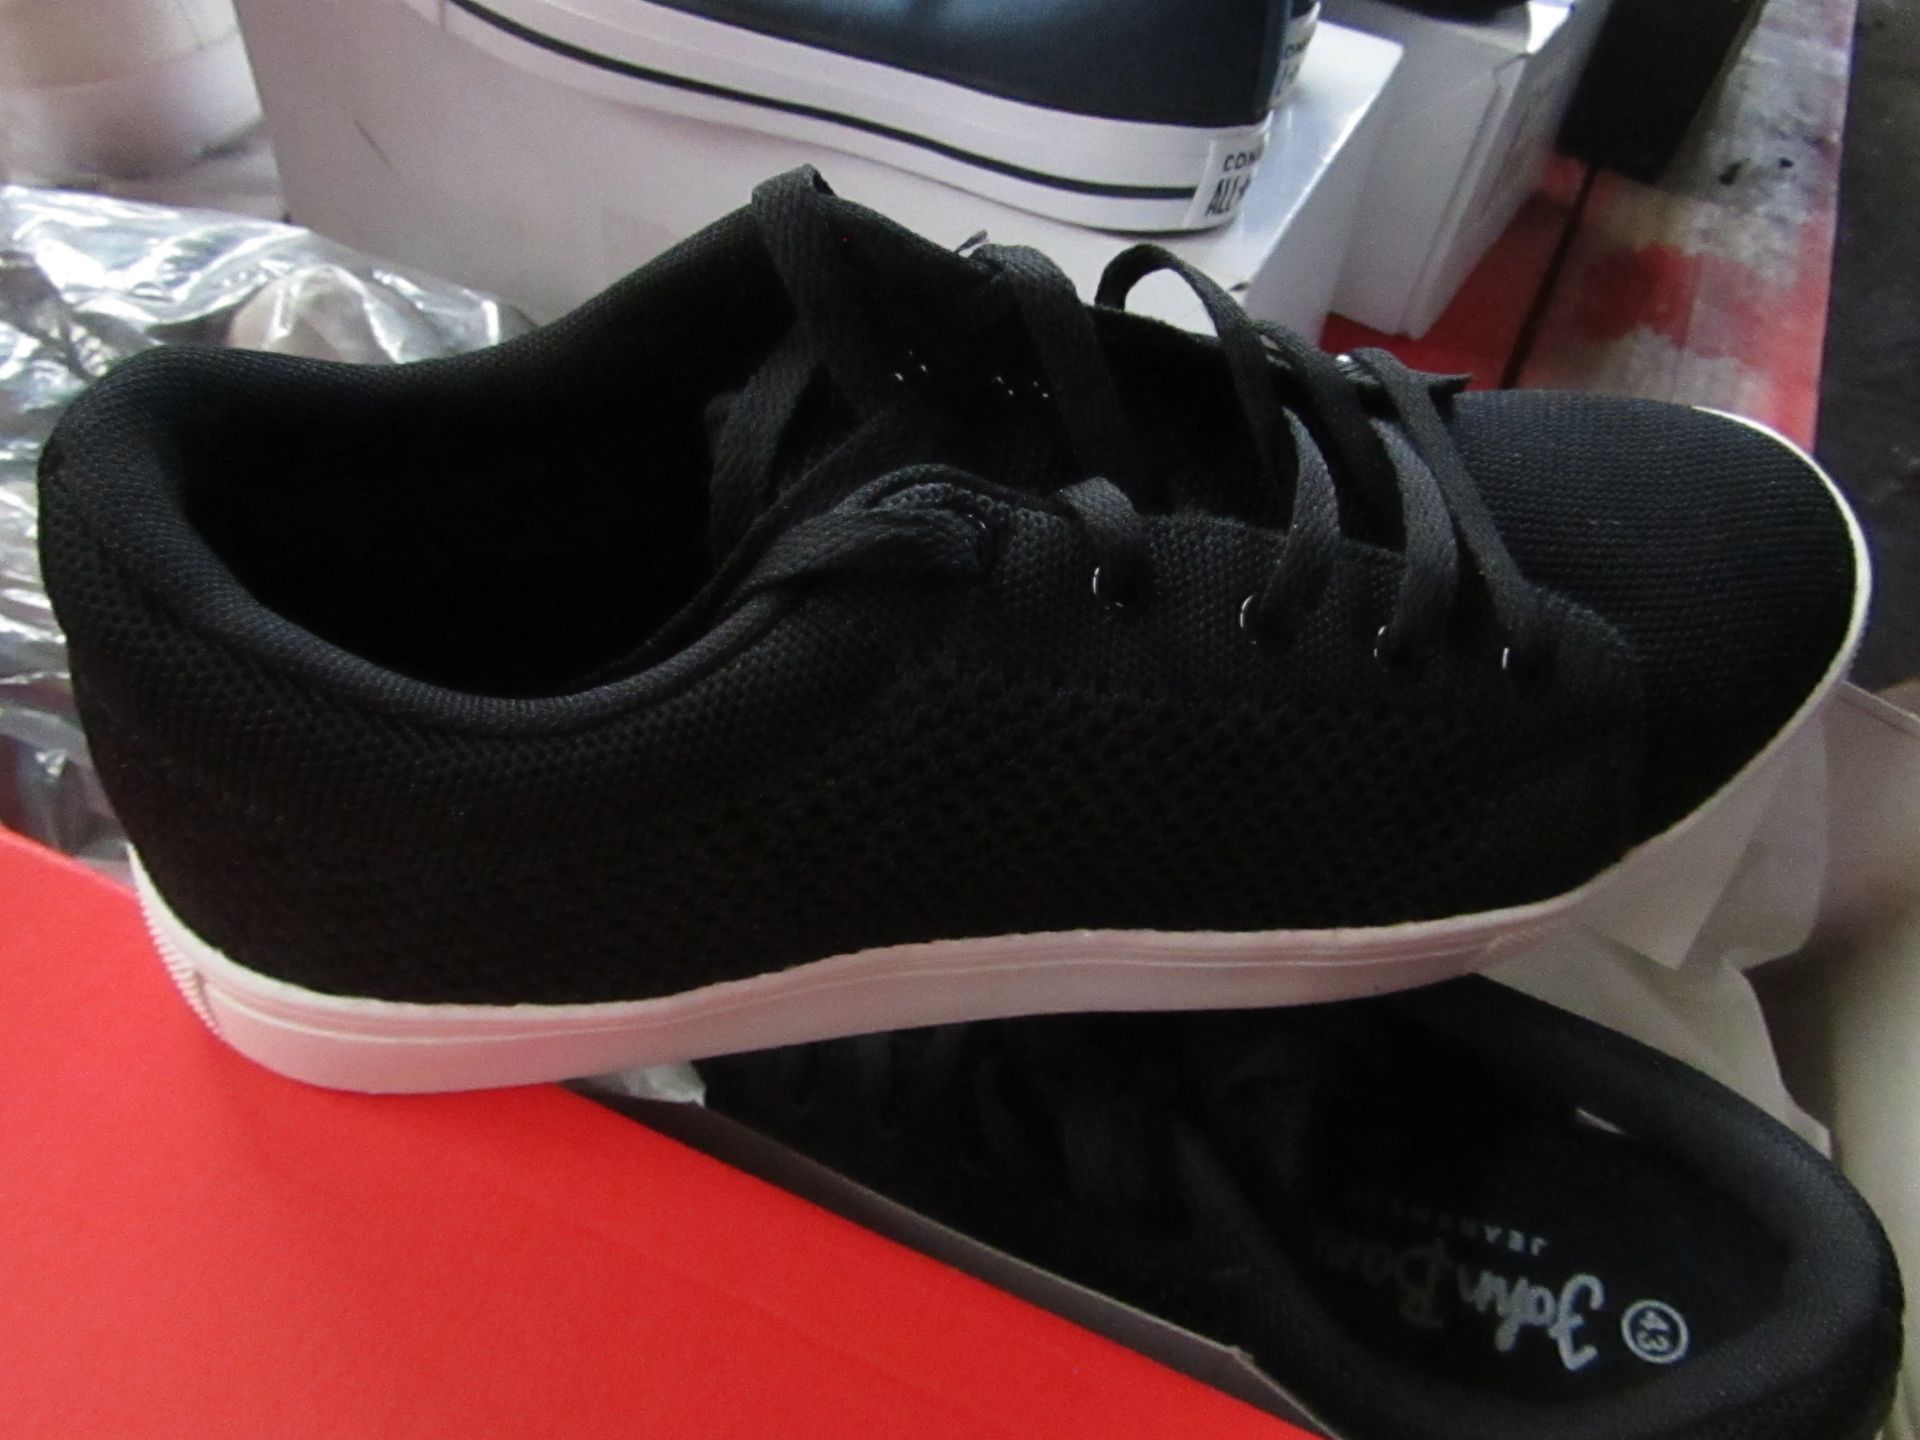 John Banner Black Knitted style trainers, new size 43